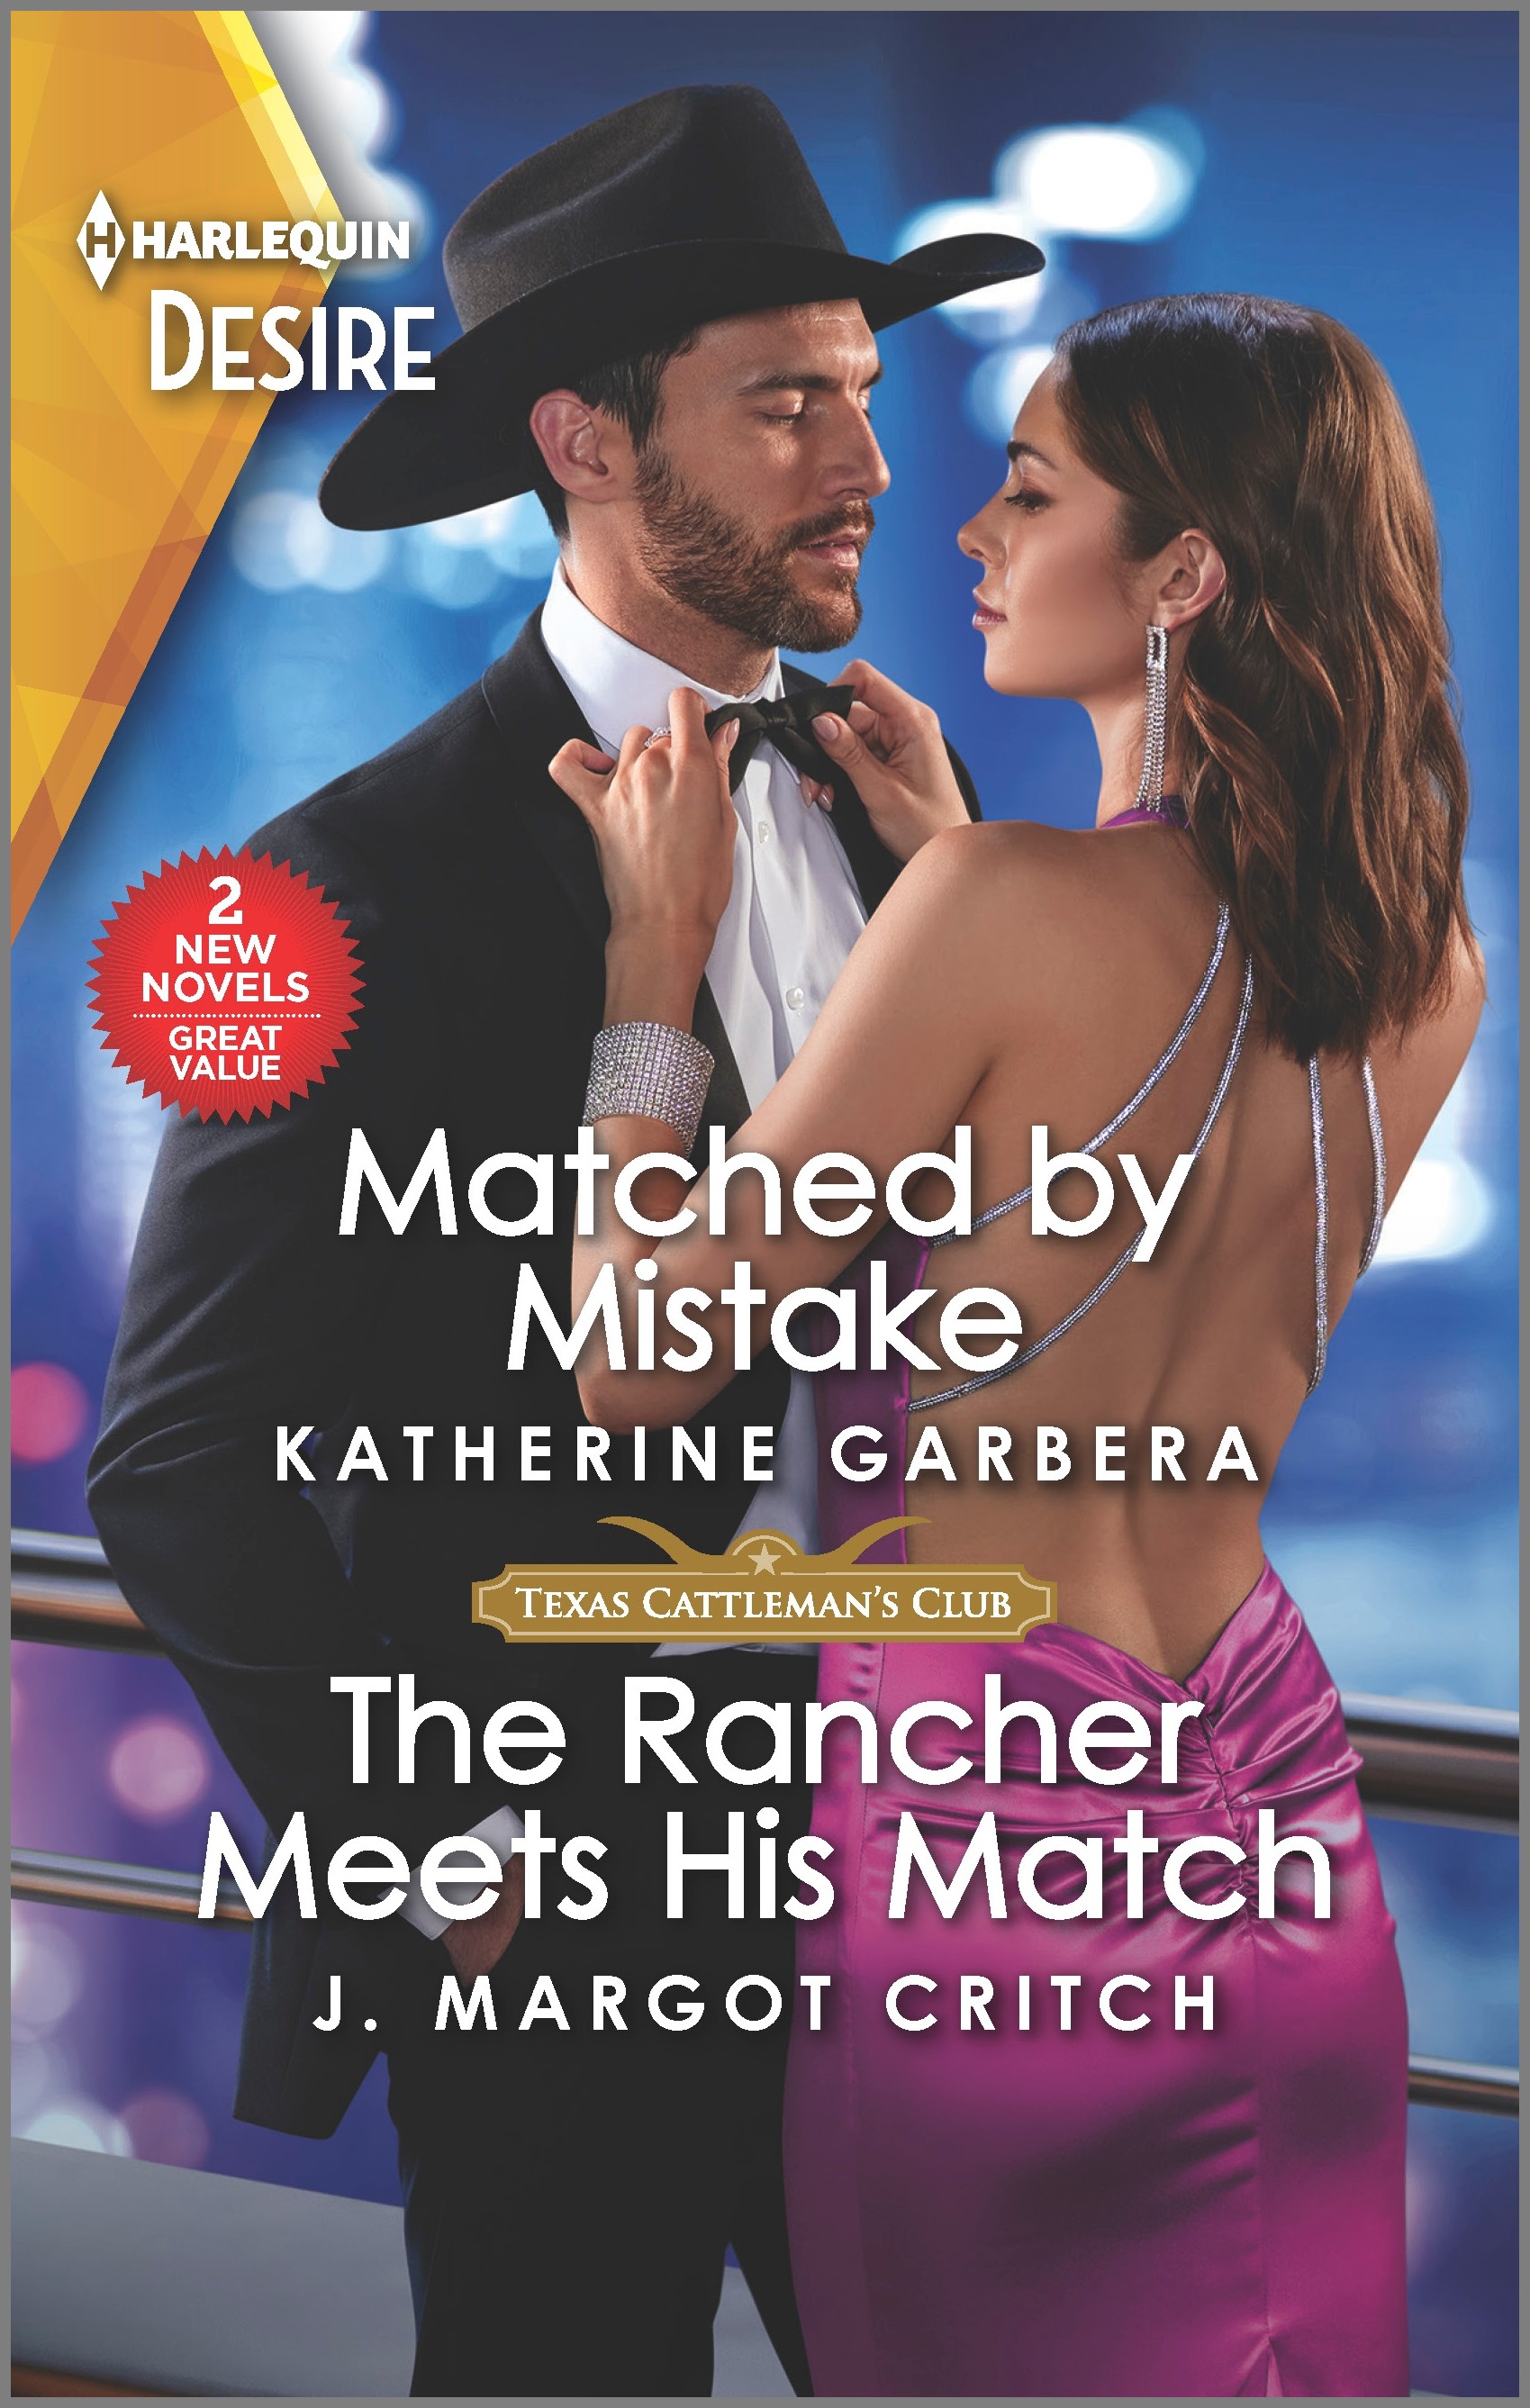 Matched by Mistake & The Rancher Meets His Match by Katherine Garbera, J. Margot Critch